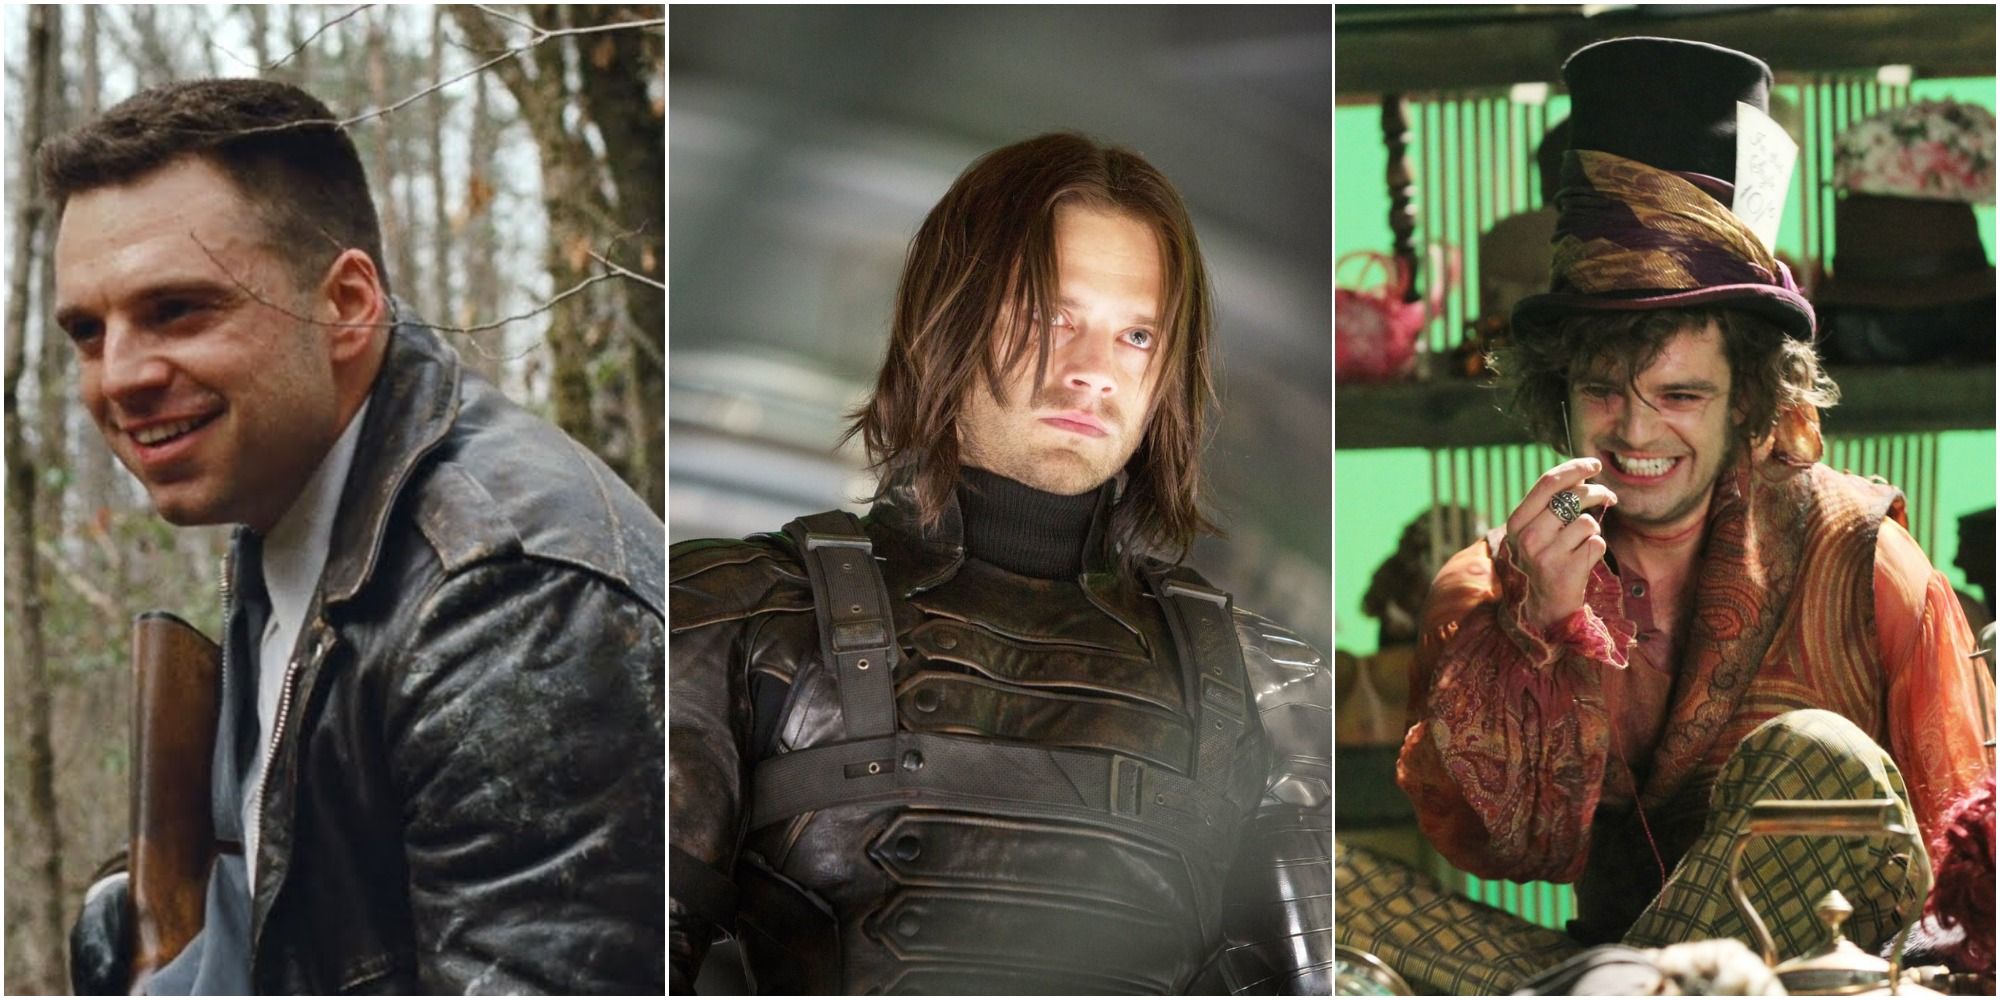 The Falcon & The Winter Soldier Sebastian Stans Best Roles (Except Bucky Barnes) Ranked By IMDb